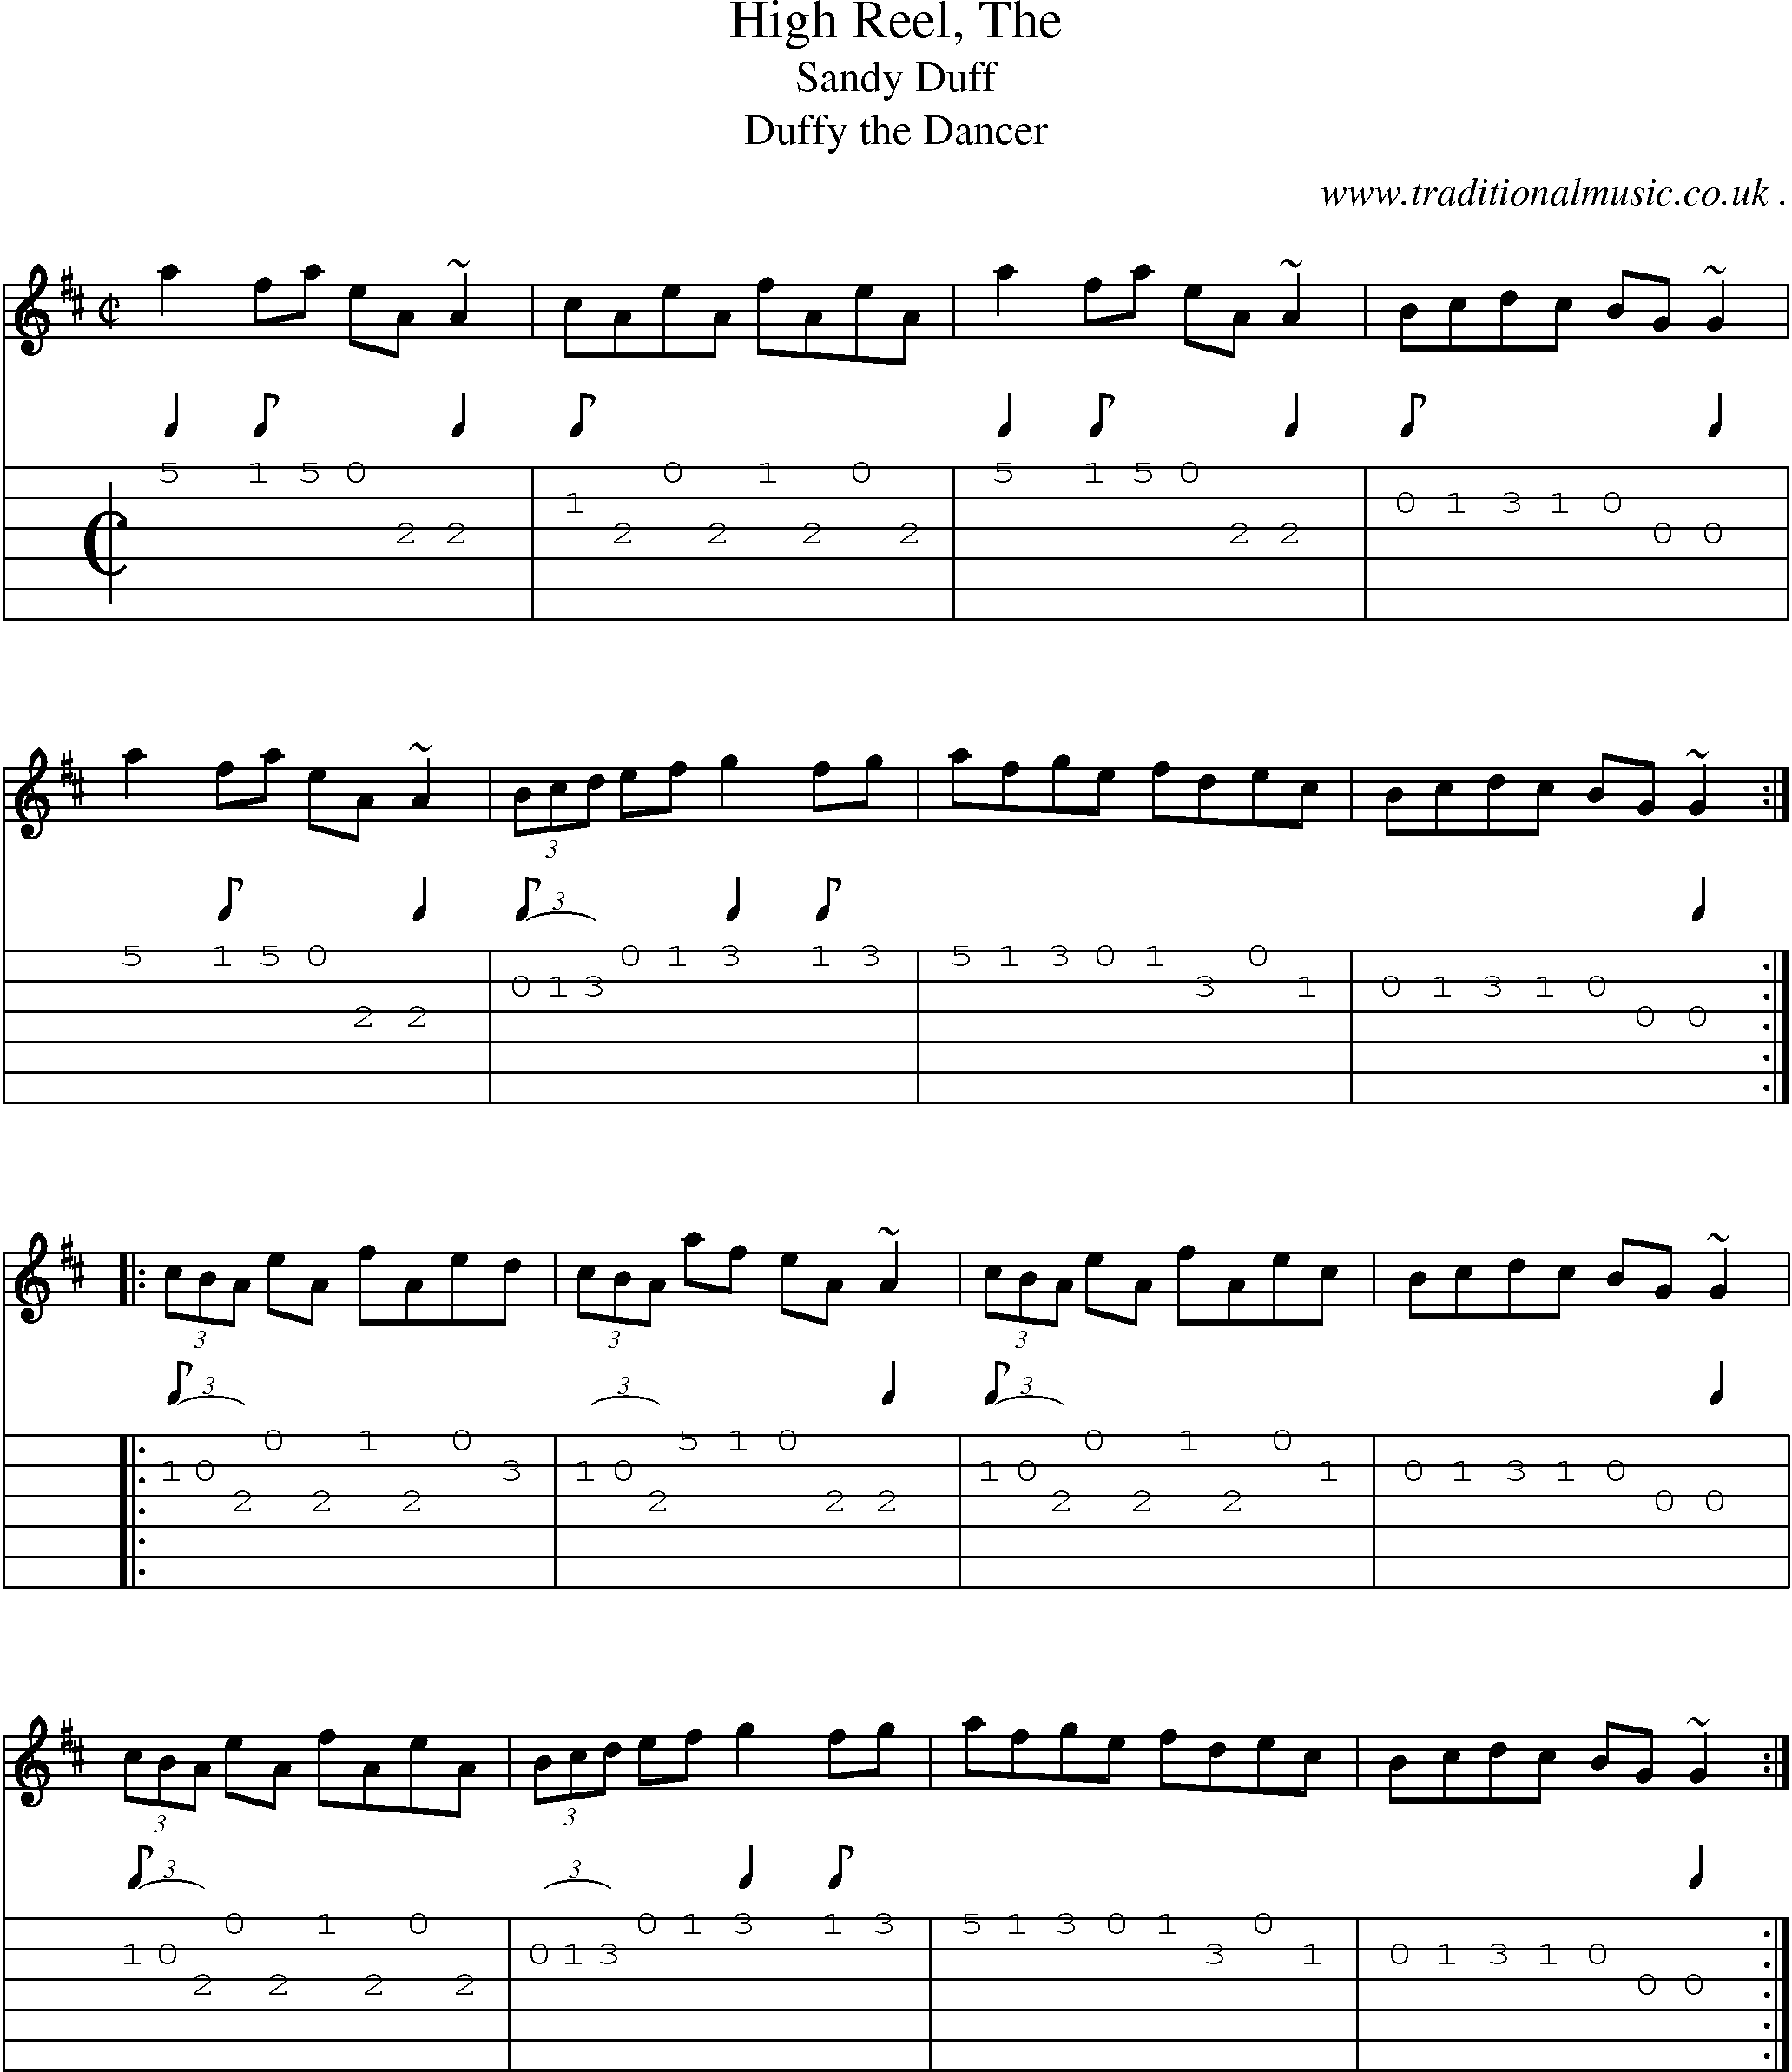 Sheet-music  score, Chords and Guitar Tabs for High Reel The